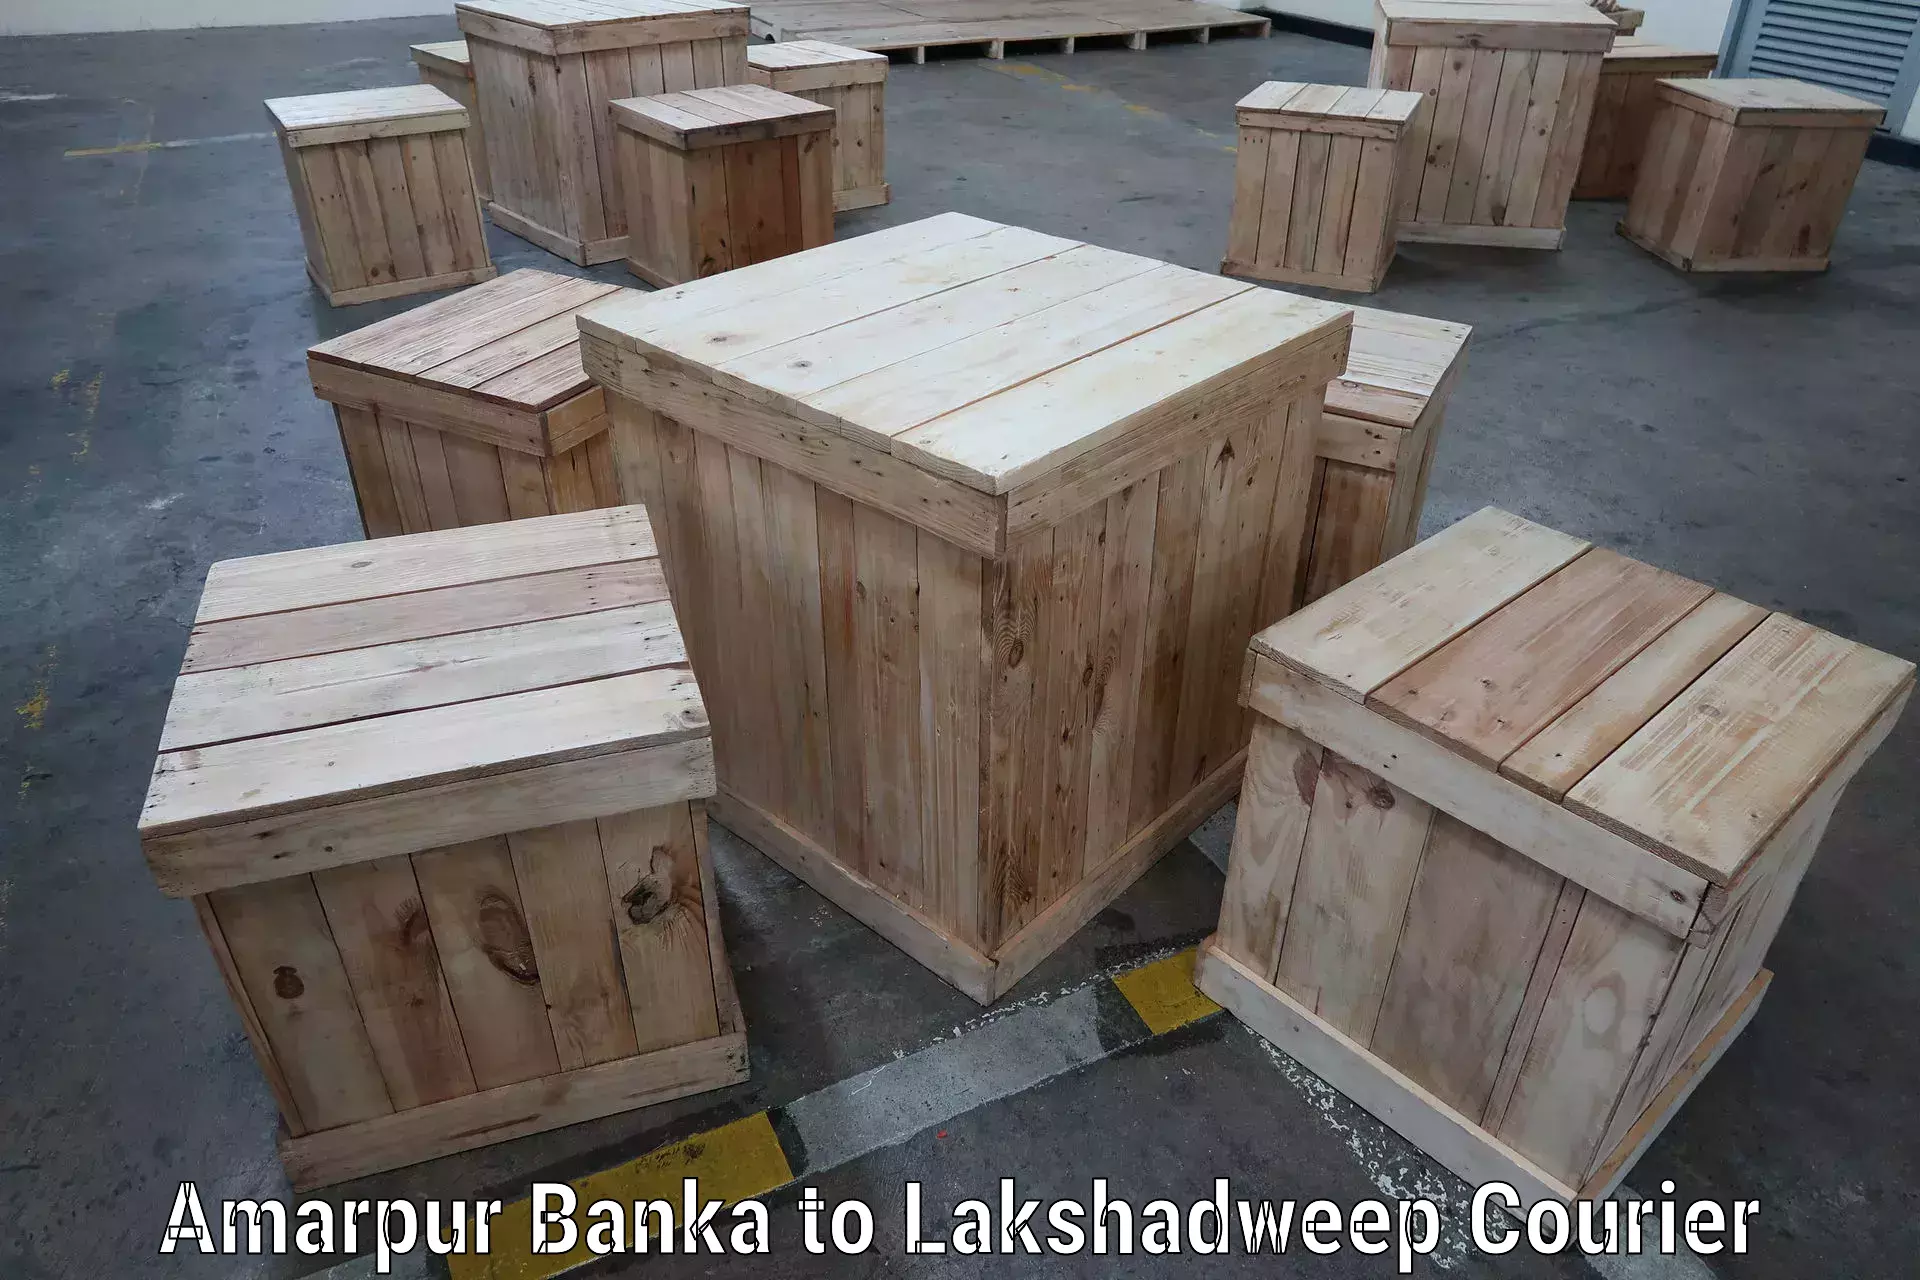 Cost-effective courier options Amarpur Banka to Lakshadweep